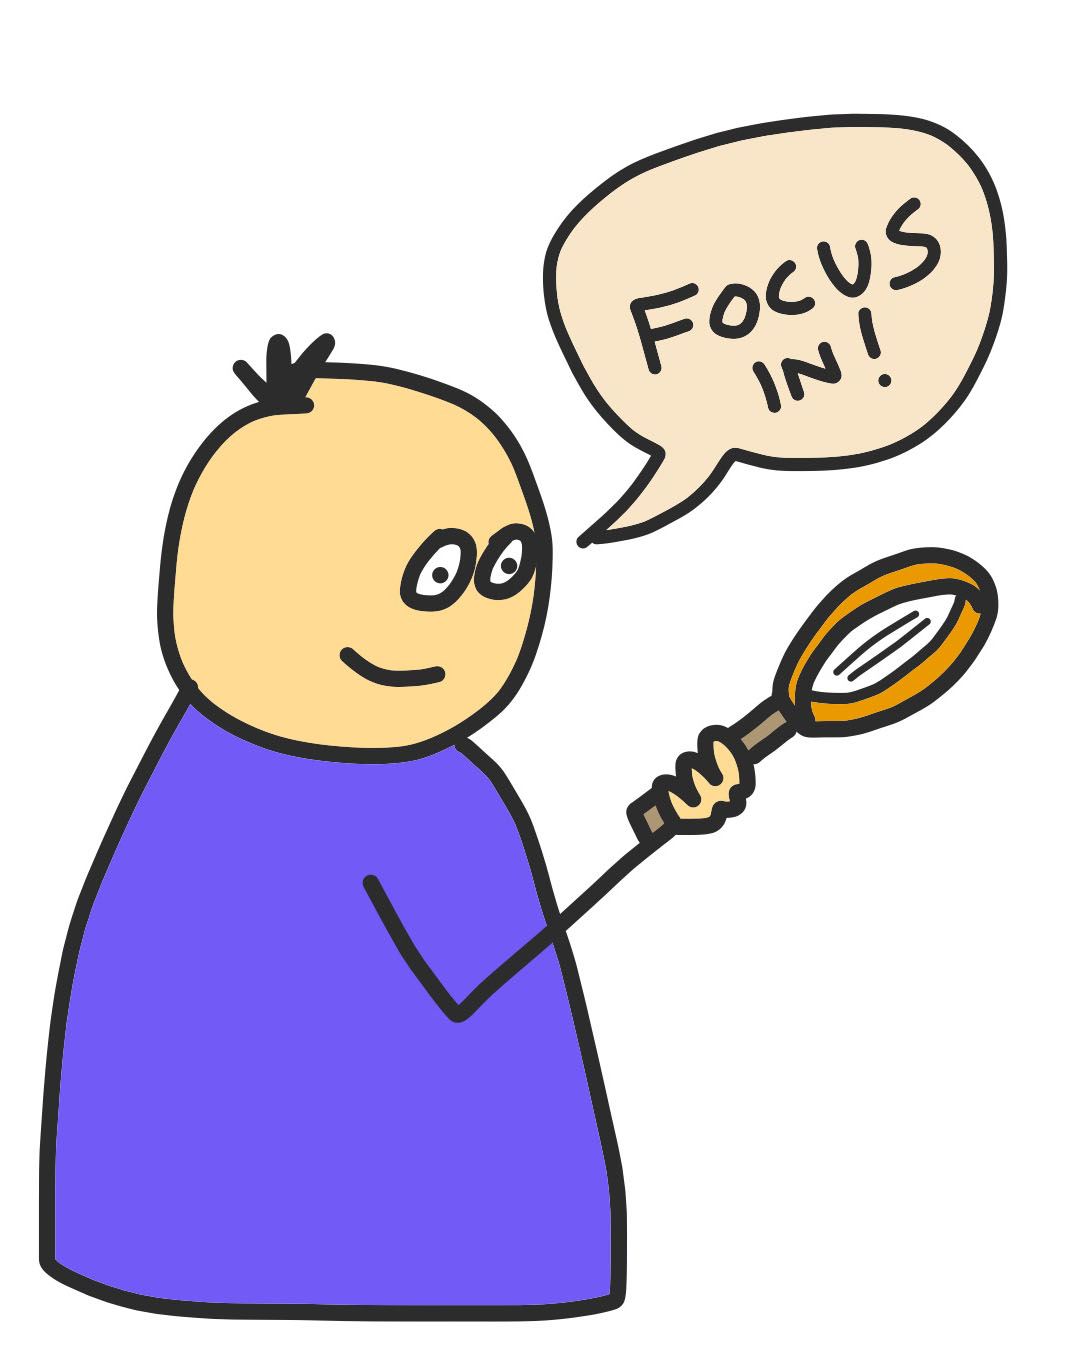 Student with magnifying glass saying "Focus in"